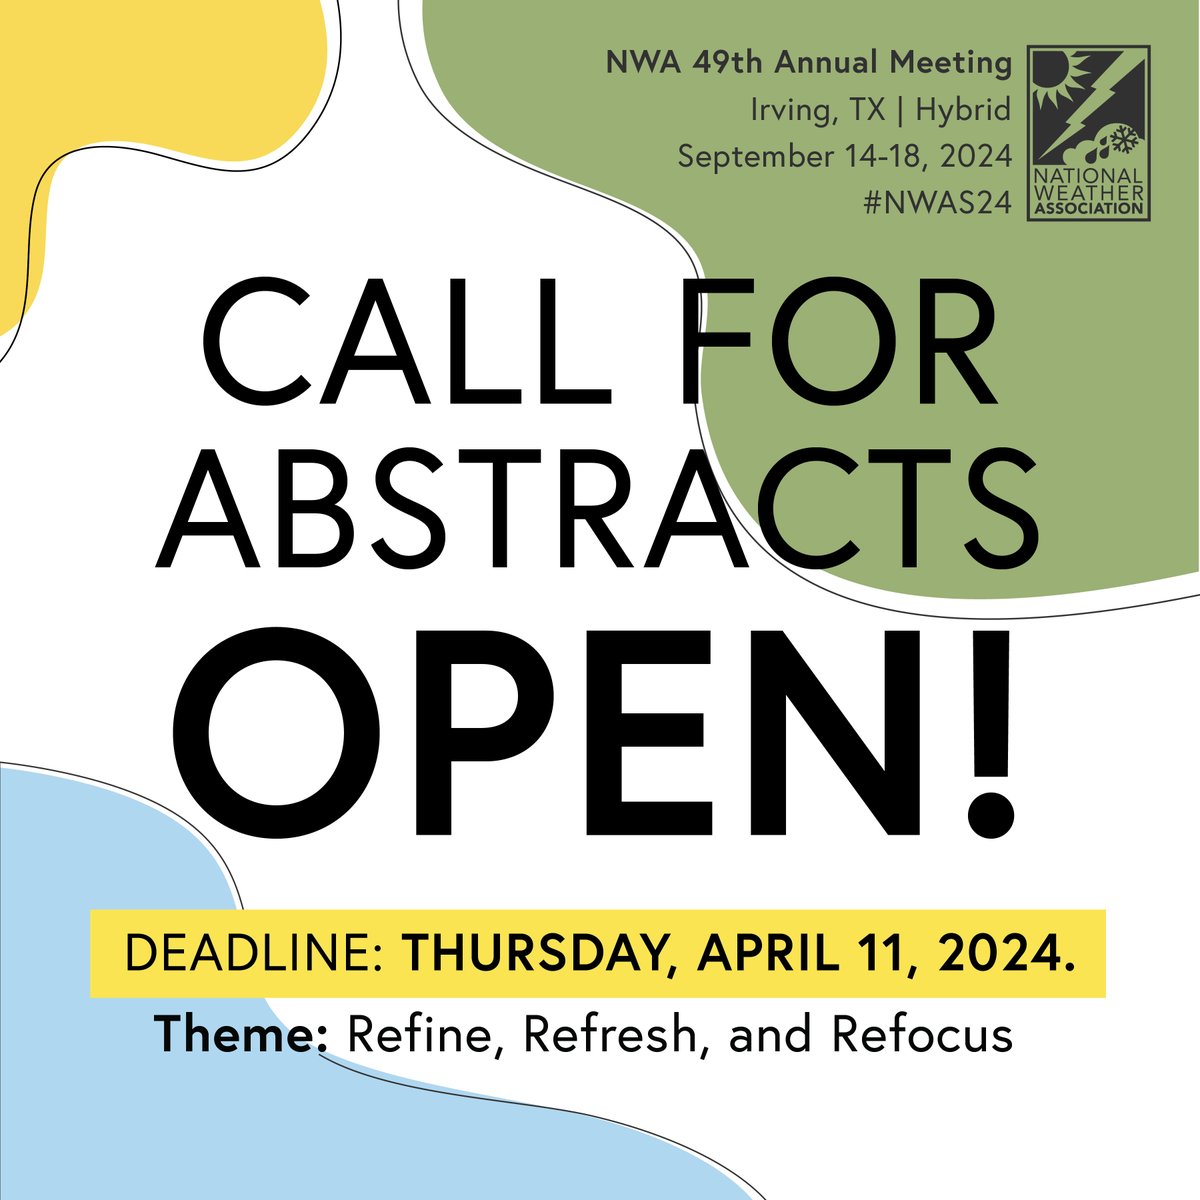 ‼One week left to submit abstracts for the Annual Meeting! ⏰Deadline: April 11, 2024. 💻Visit our Annual Meeting page for more information: nwas.org/2024-annual-me…